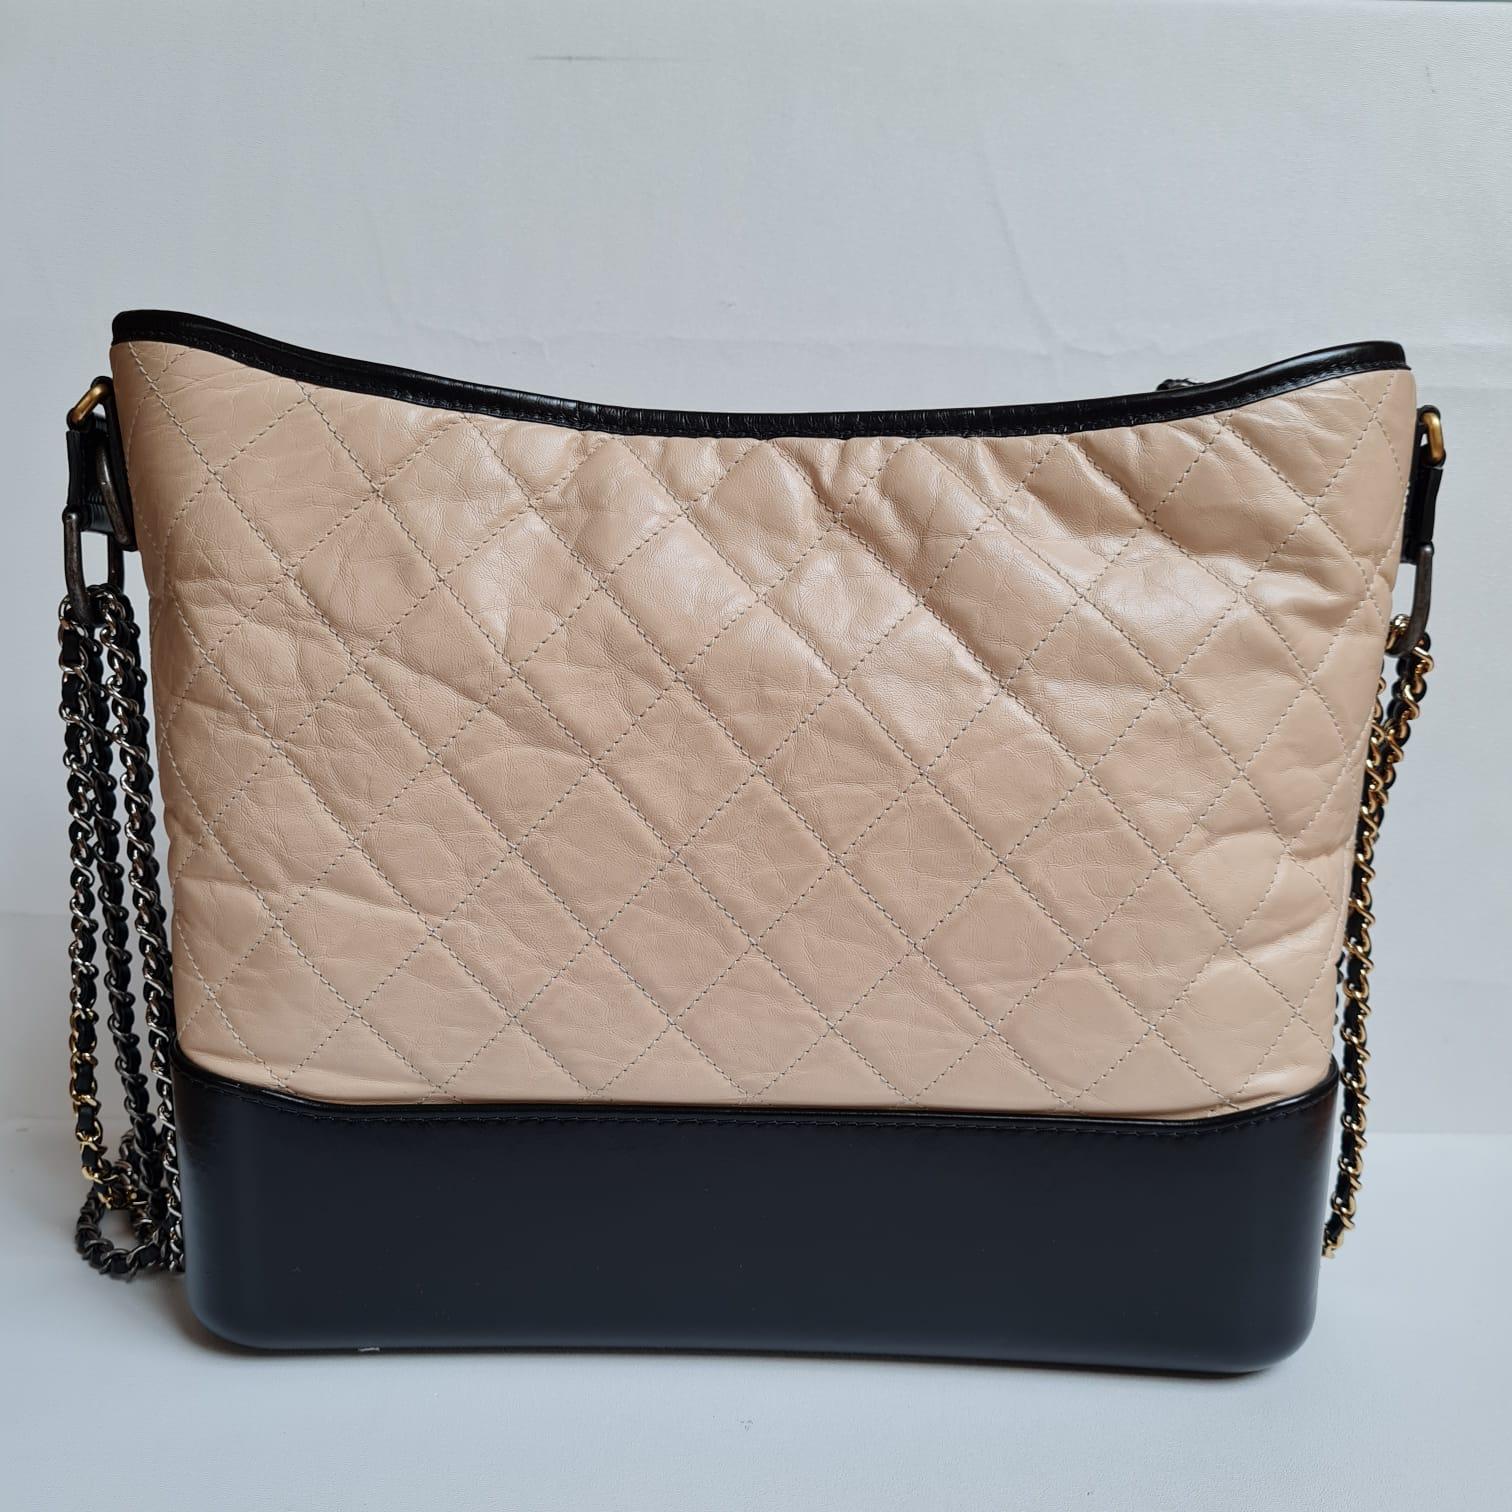 Chanel Beige Quilted Large Gabrielle Bag For Sale 1